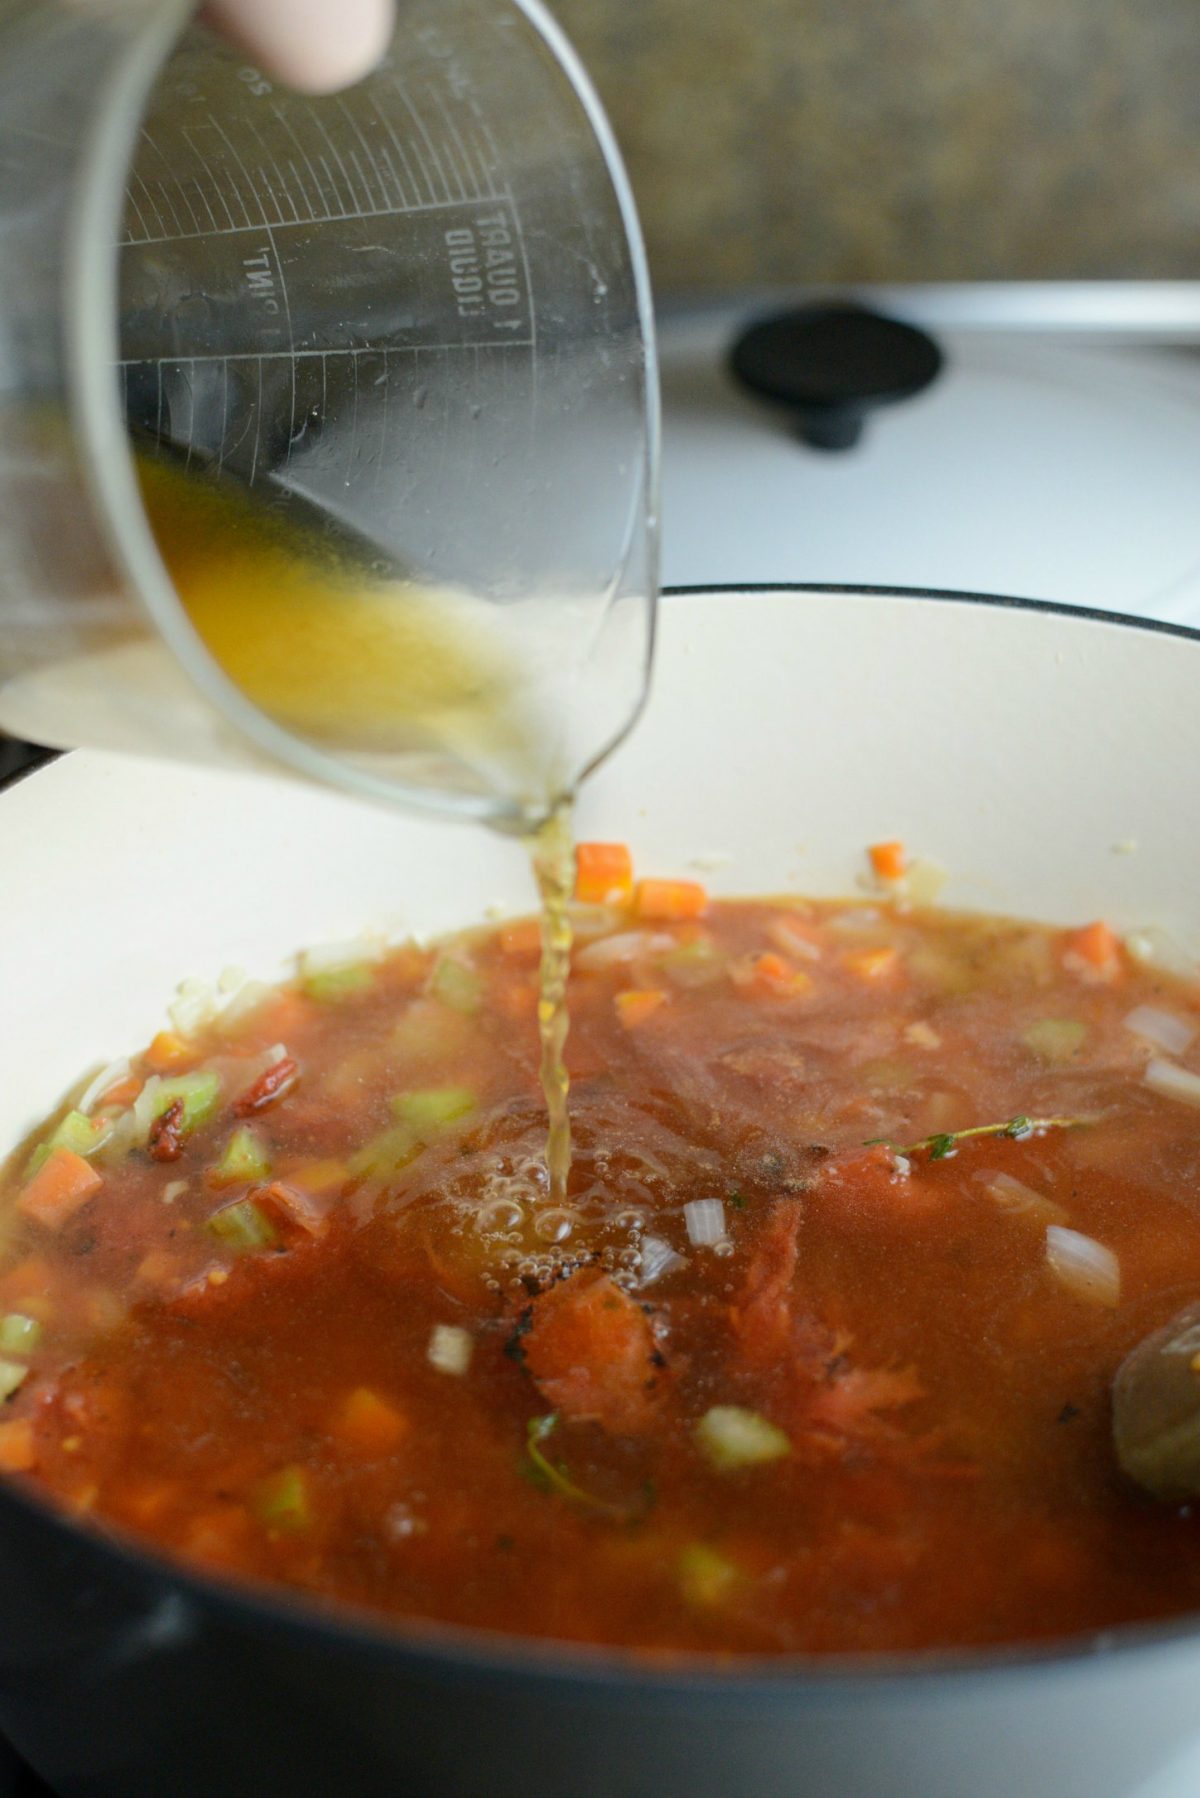 Pour in vegetable broth